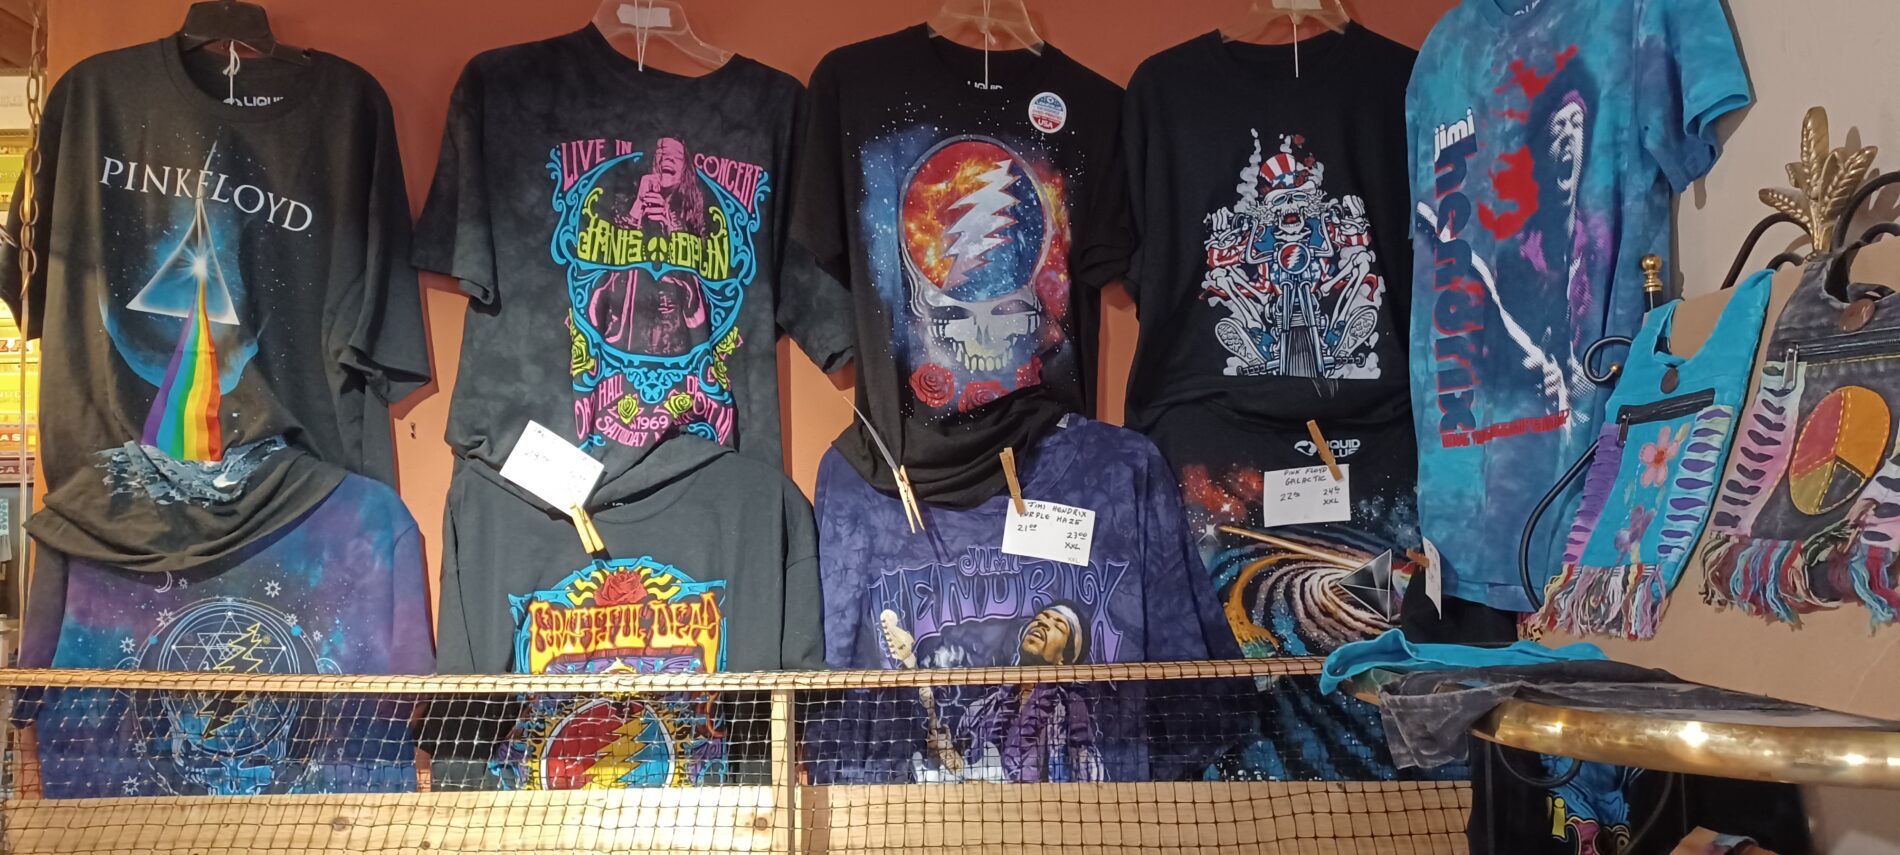 A display of t - shirts in a store.